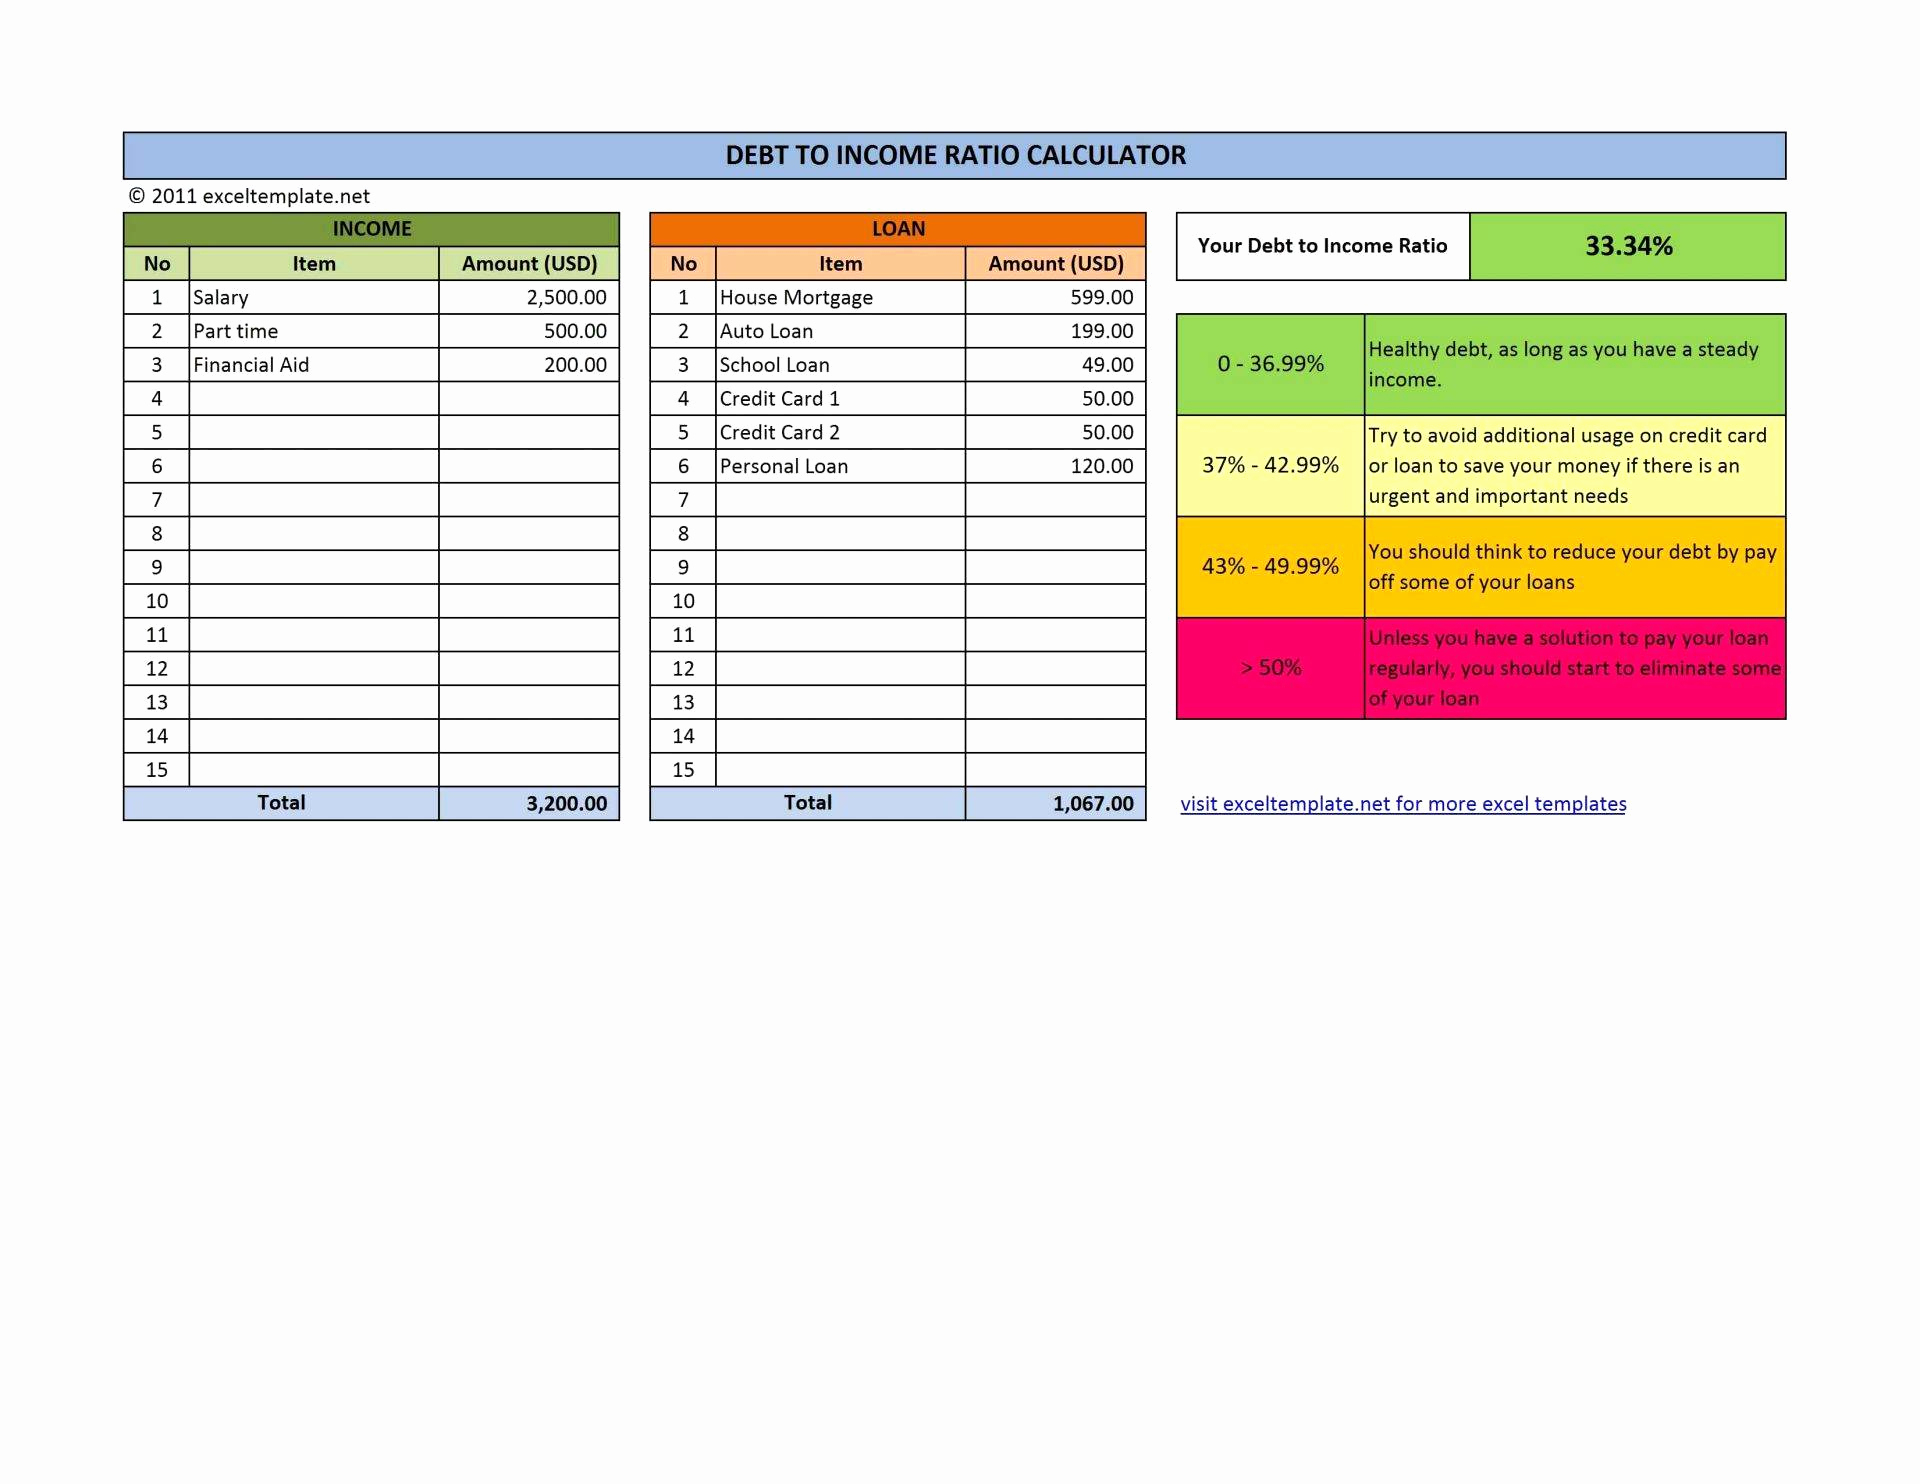 Home Loan Comparison Spreadsheet For Documents Ideas. Loan intended for Home Loan Comparison Spreadsheet